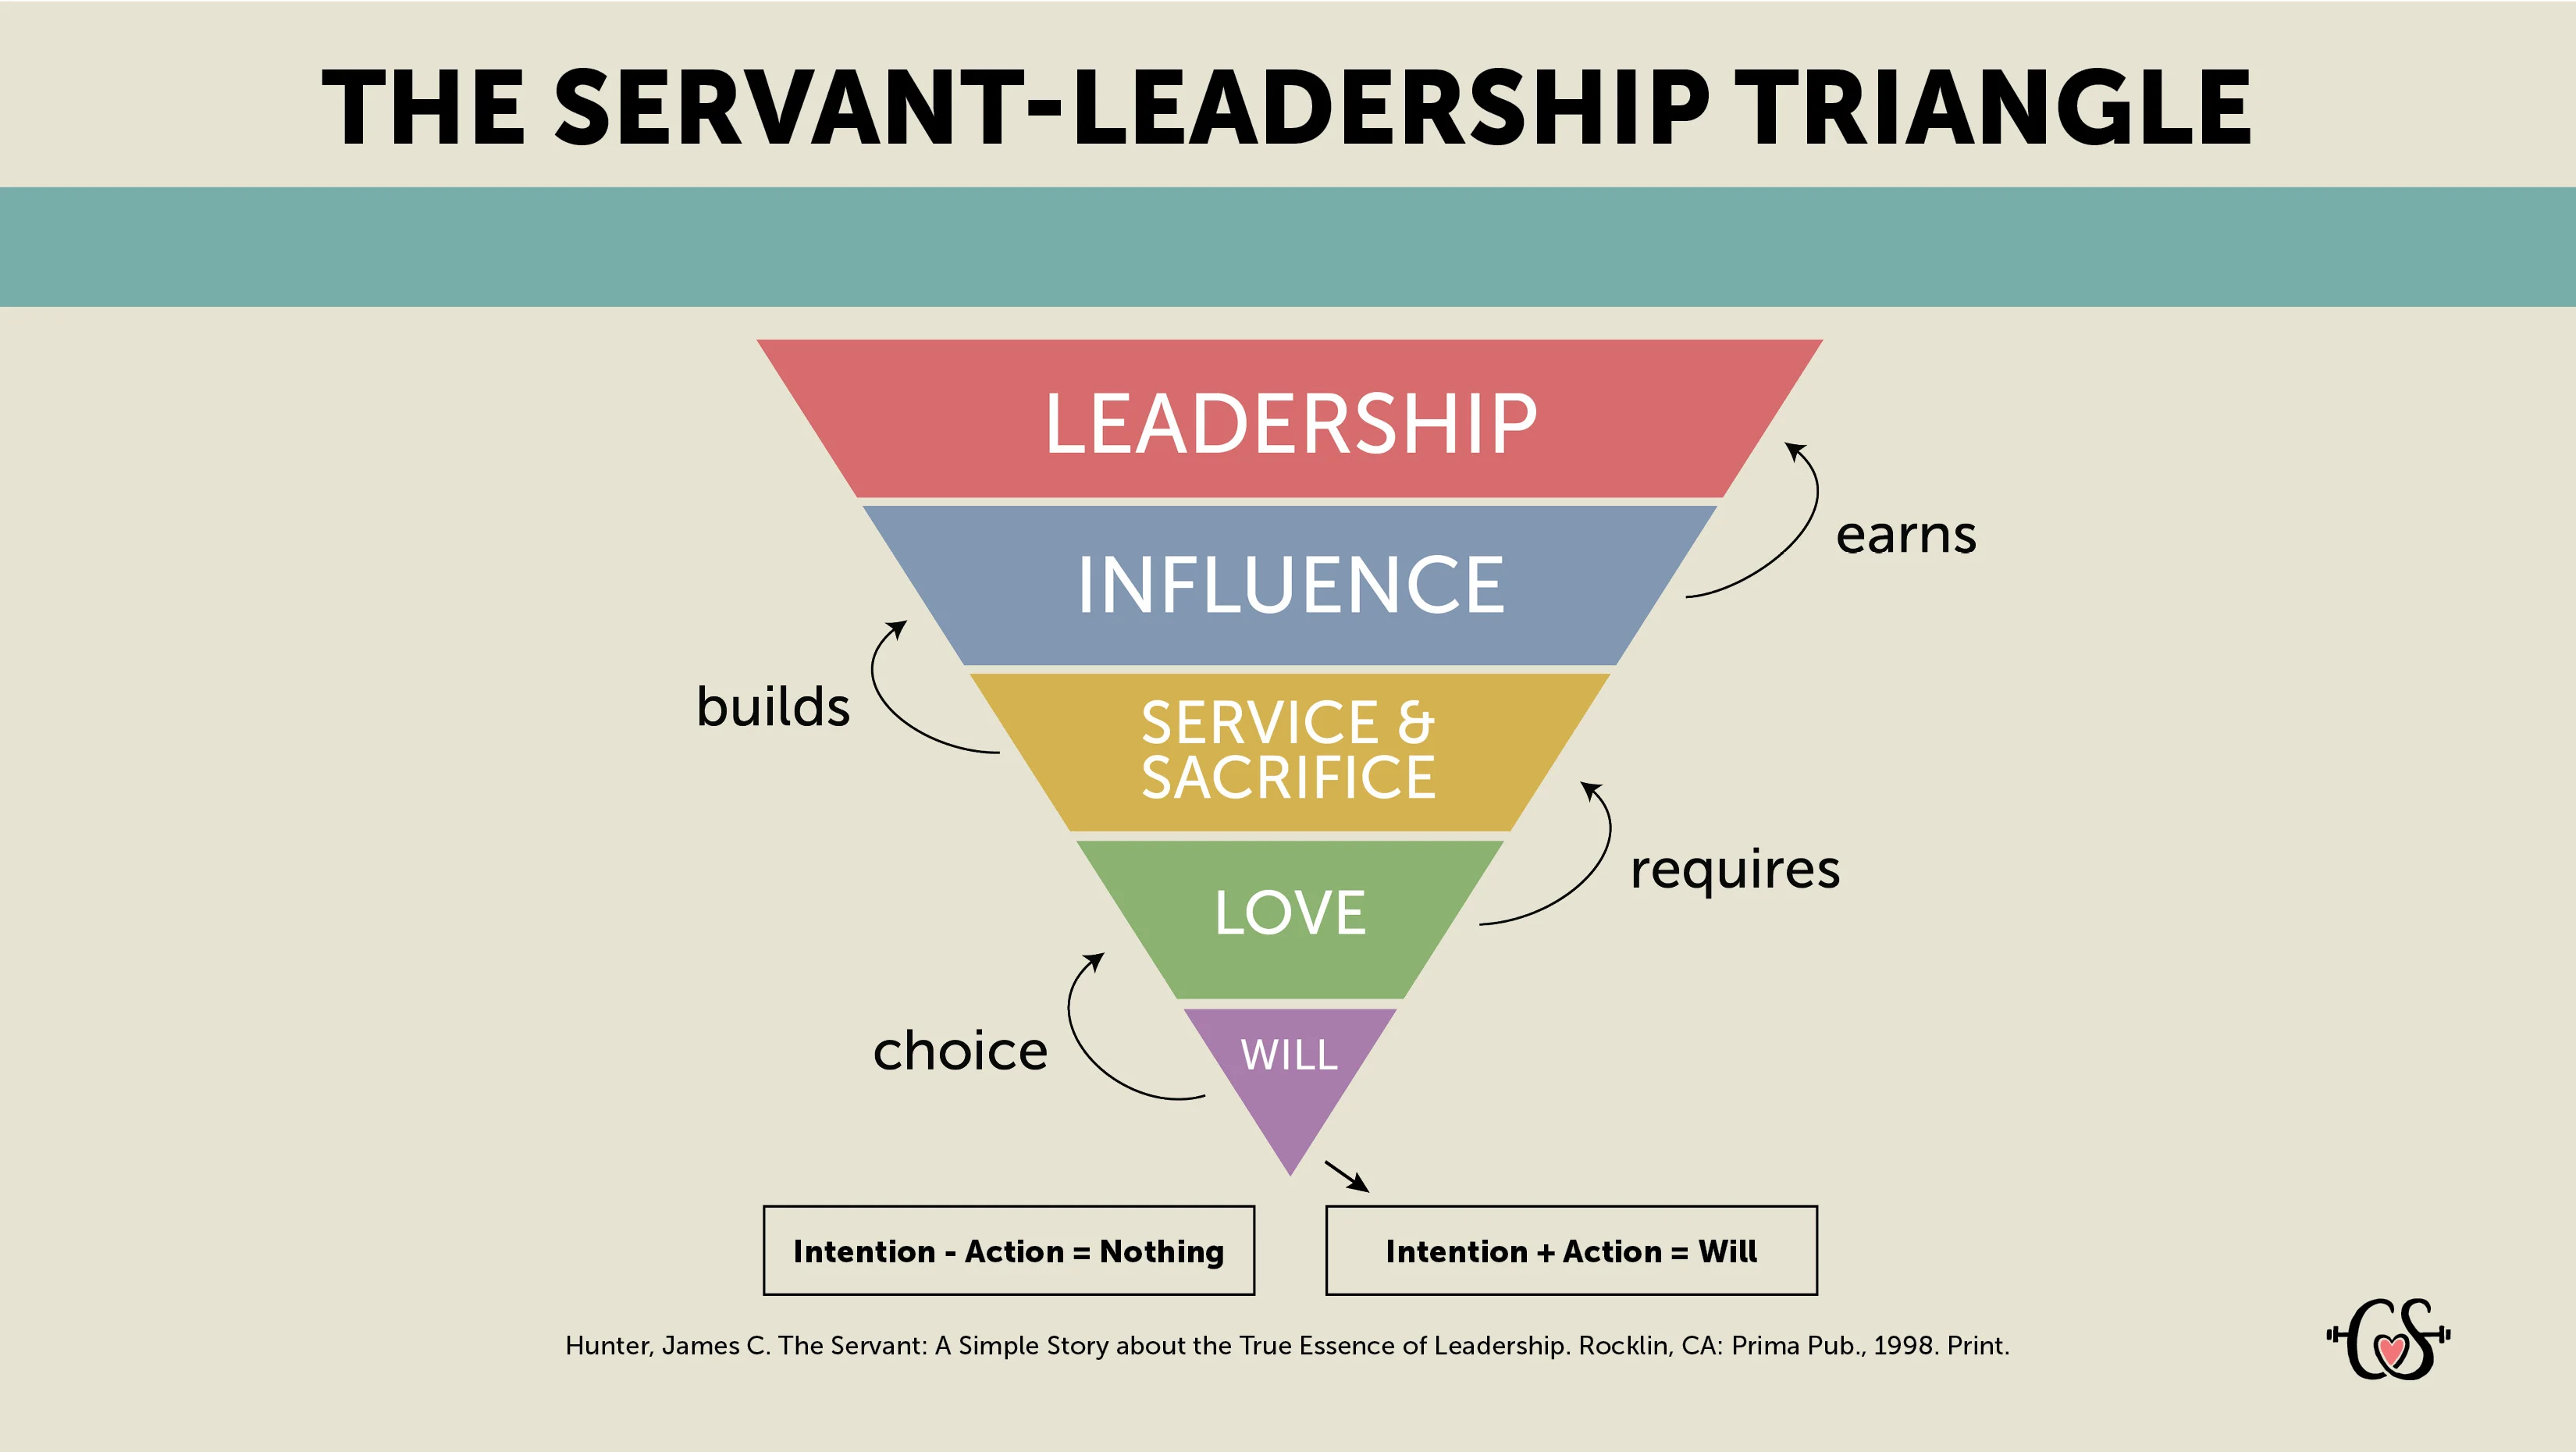 The Servant-Leadership Triangle. It starts from the smallest part of the triangle and builds. Will chooses love, love requires service & sacrifice, service & sacrifice builds influence, influence earns leadership. Intention + action = will; intention - action = nothing.